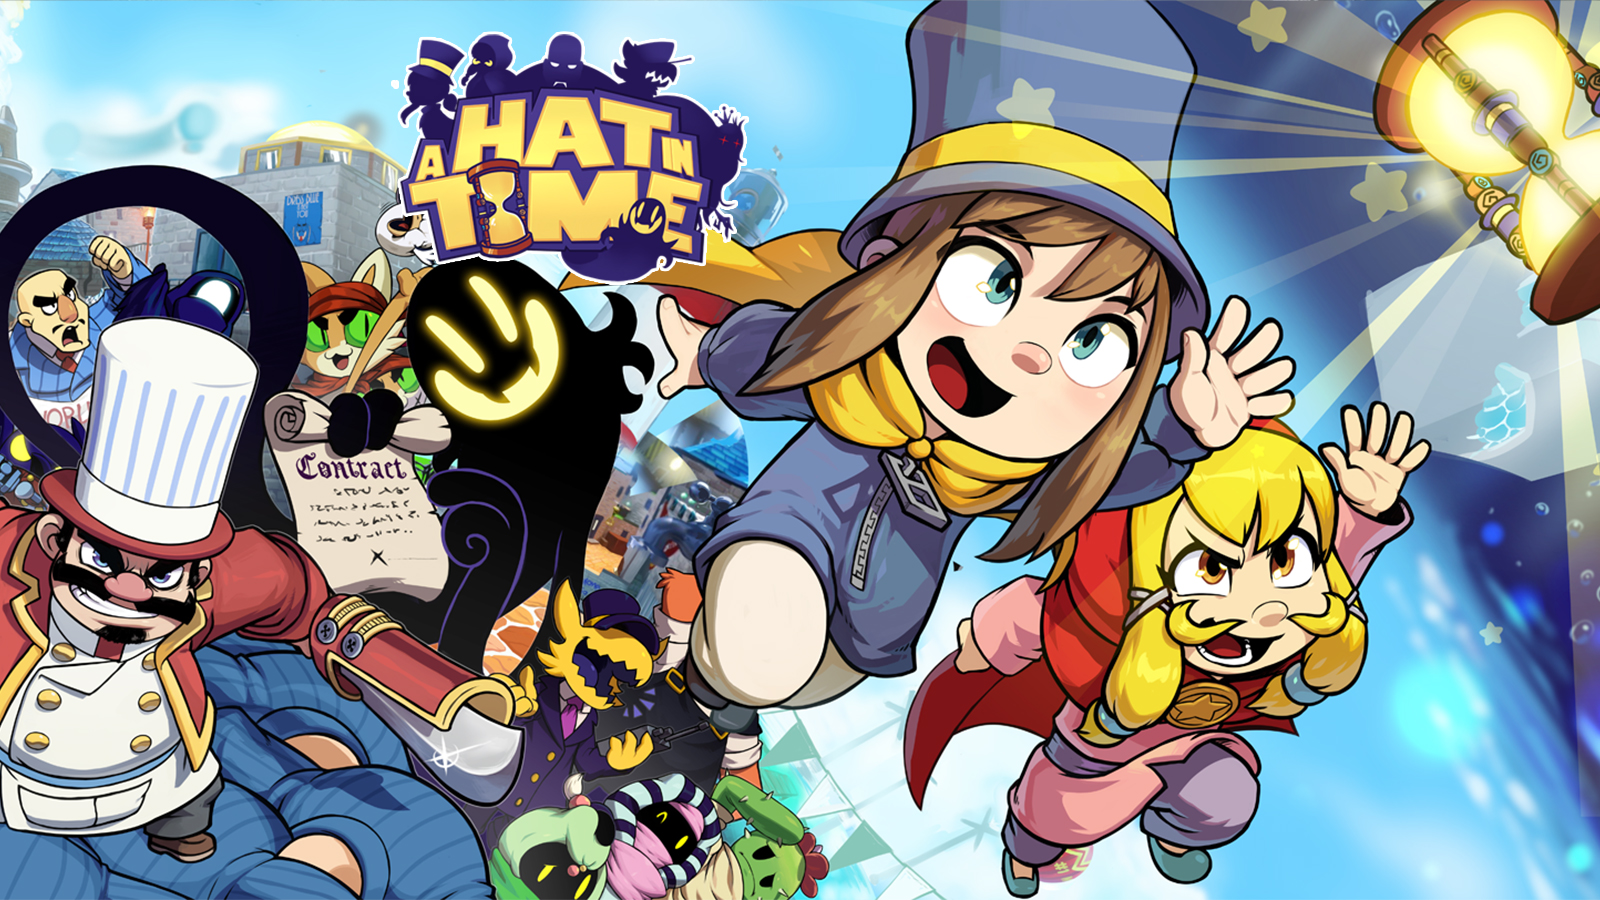 A Hat in Time on